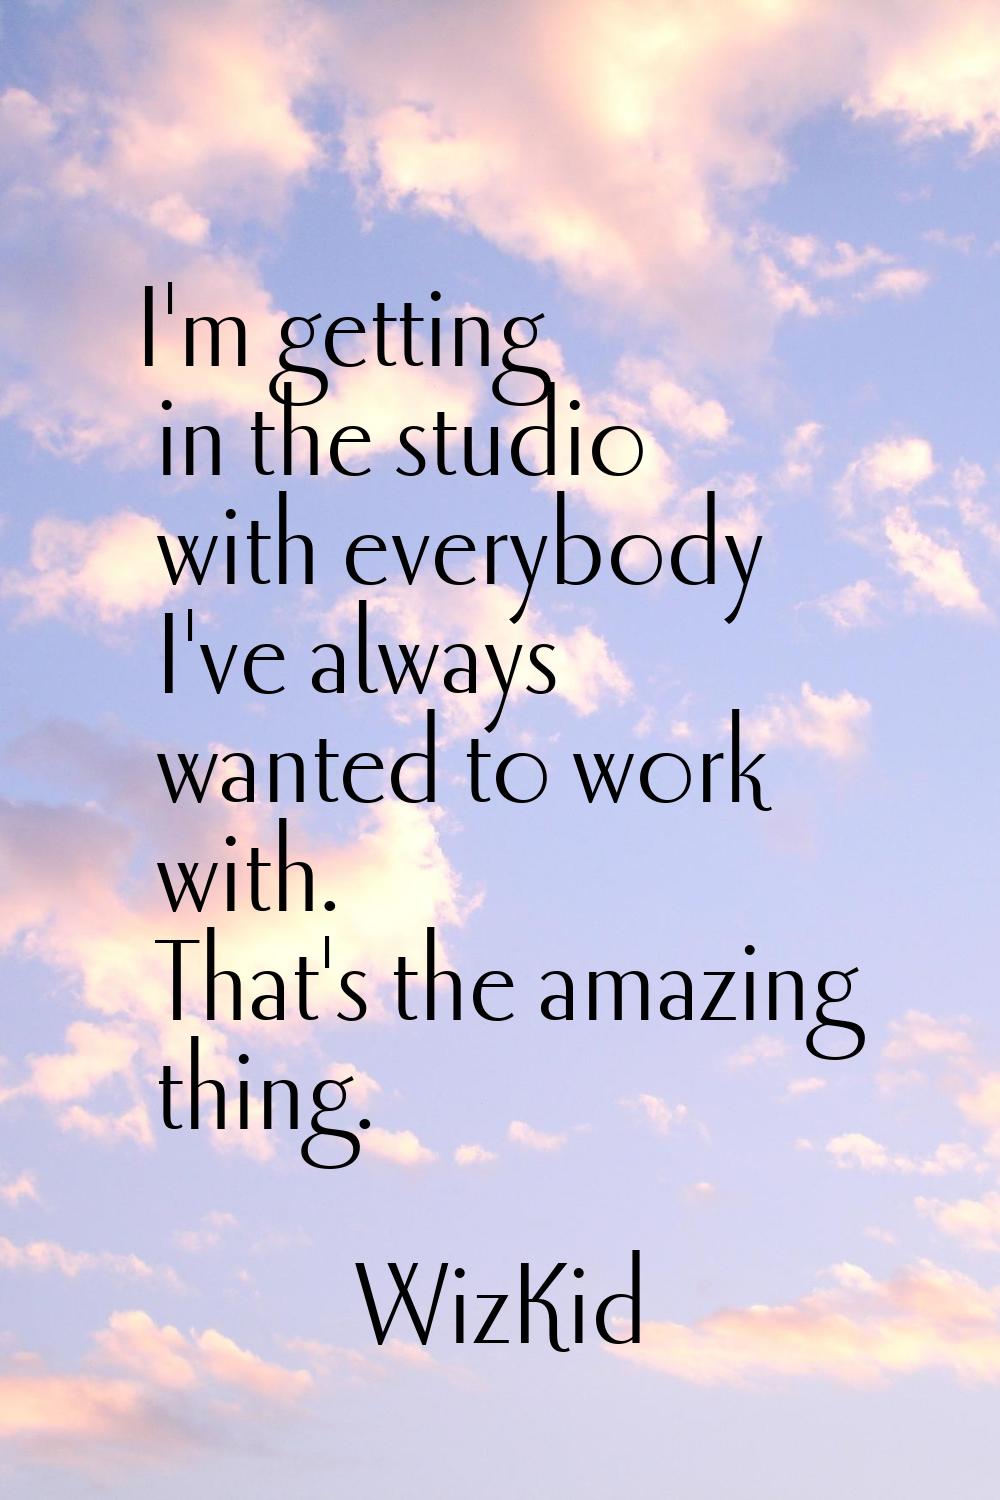 I'm getting in the studio with everybody I've always wanted to work with. That's the amazing thing.